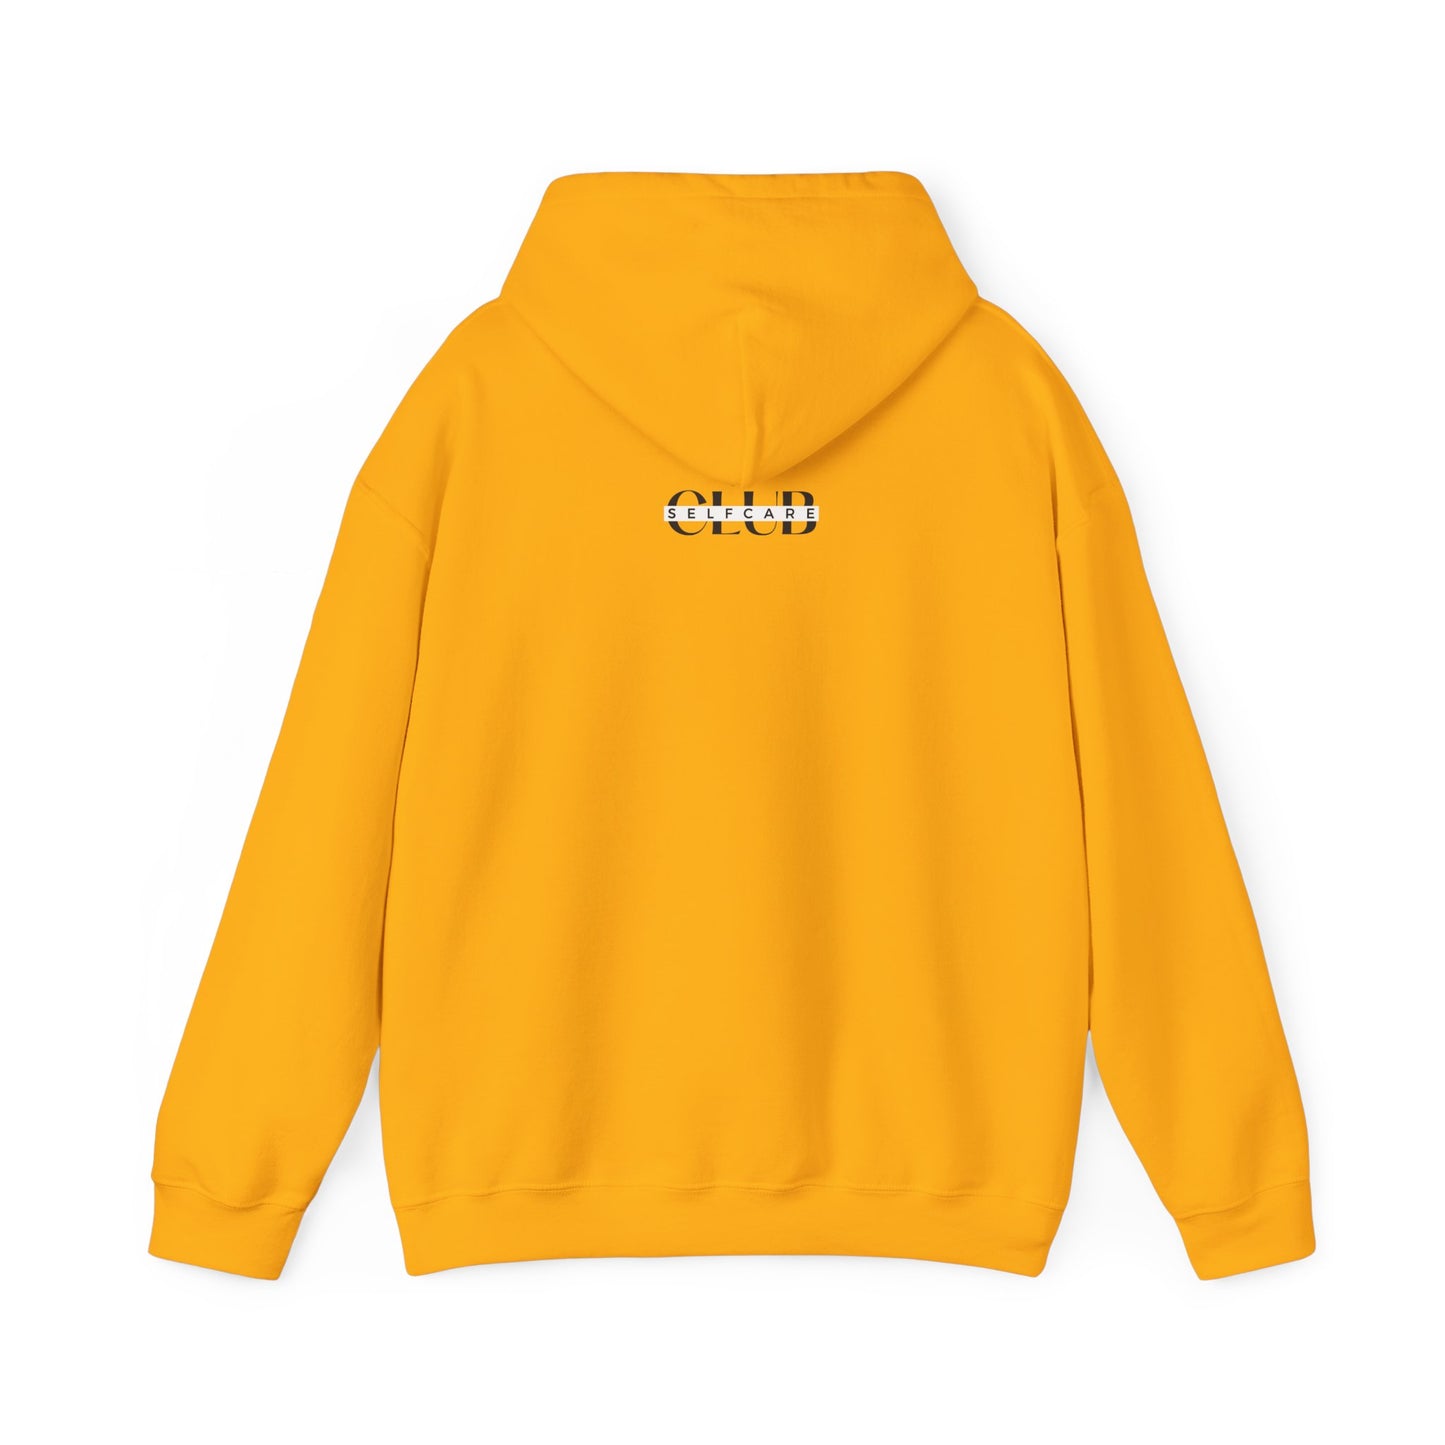 Empowered By Hooded Sweatshirt